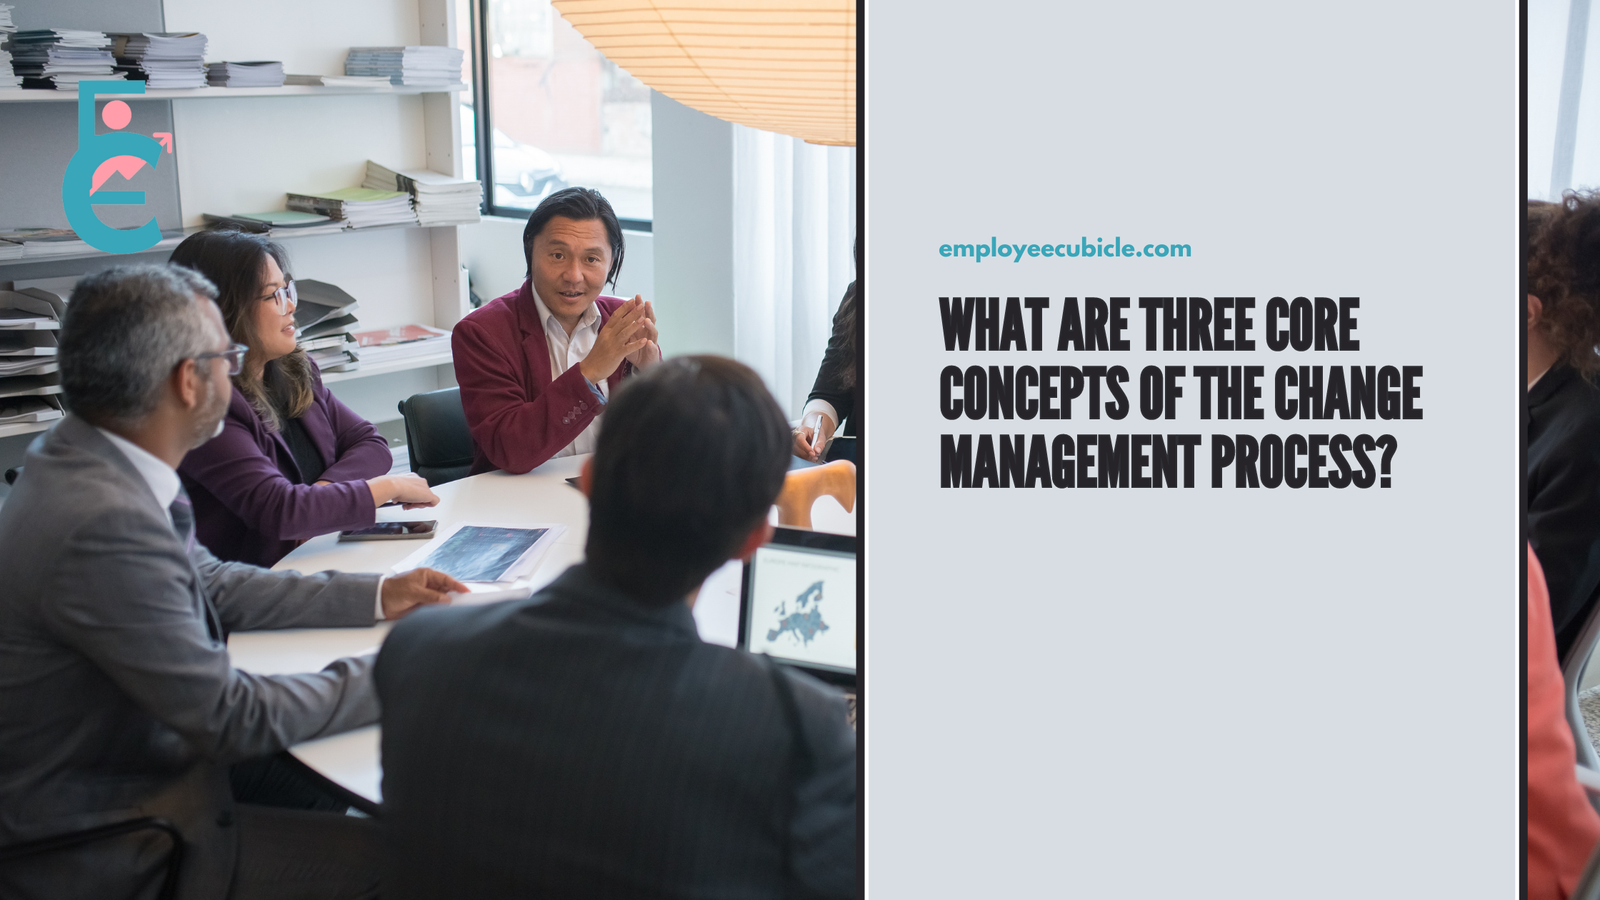 What are three core concepts of the change management process